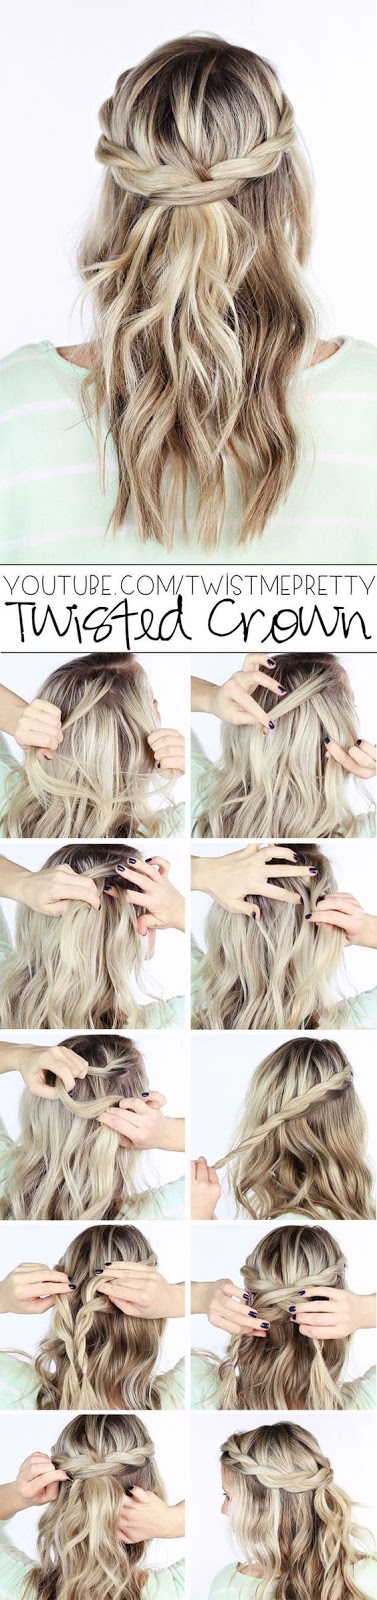 18 Pinterest Hair Tutorials You Need to Try 